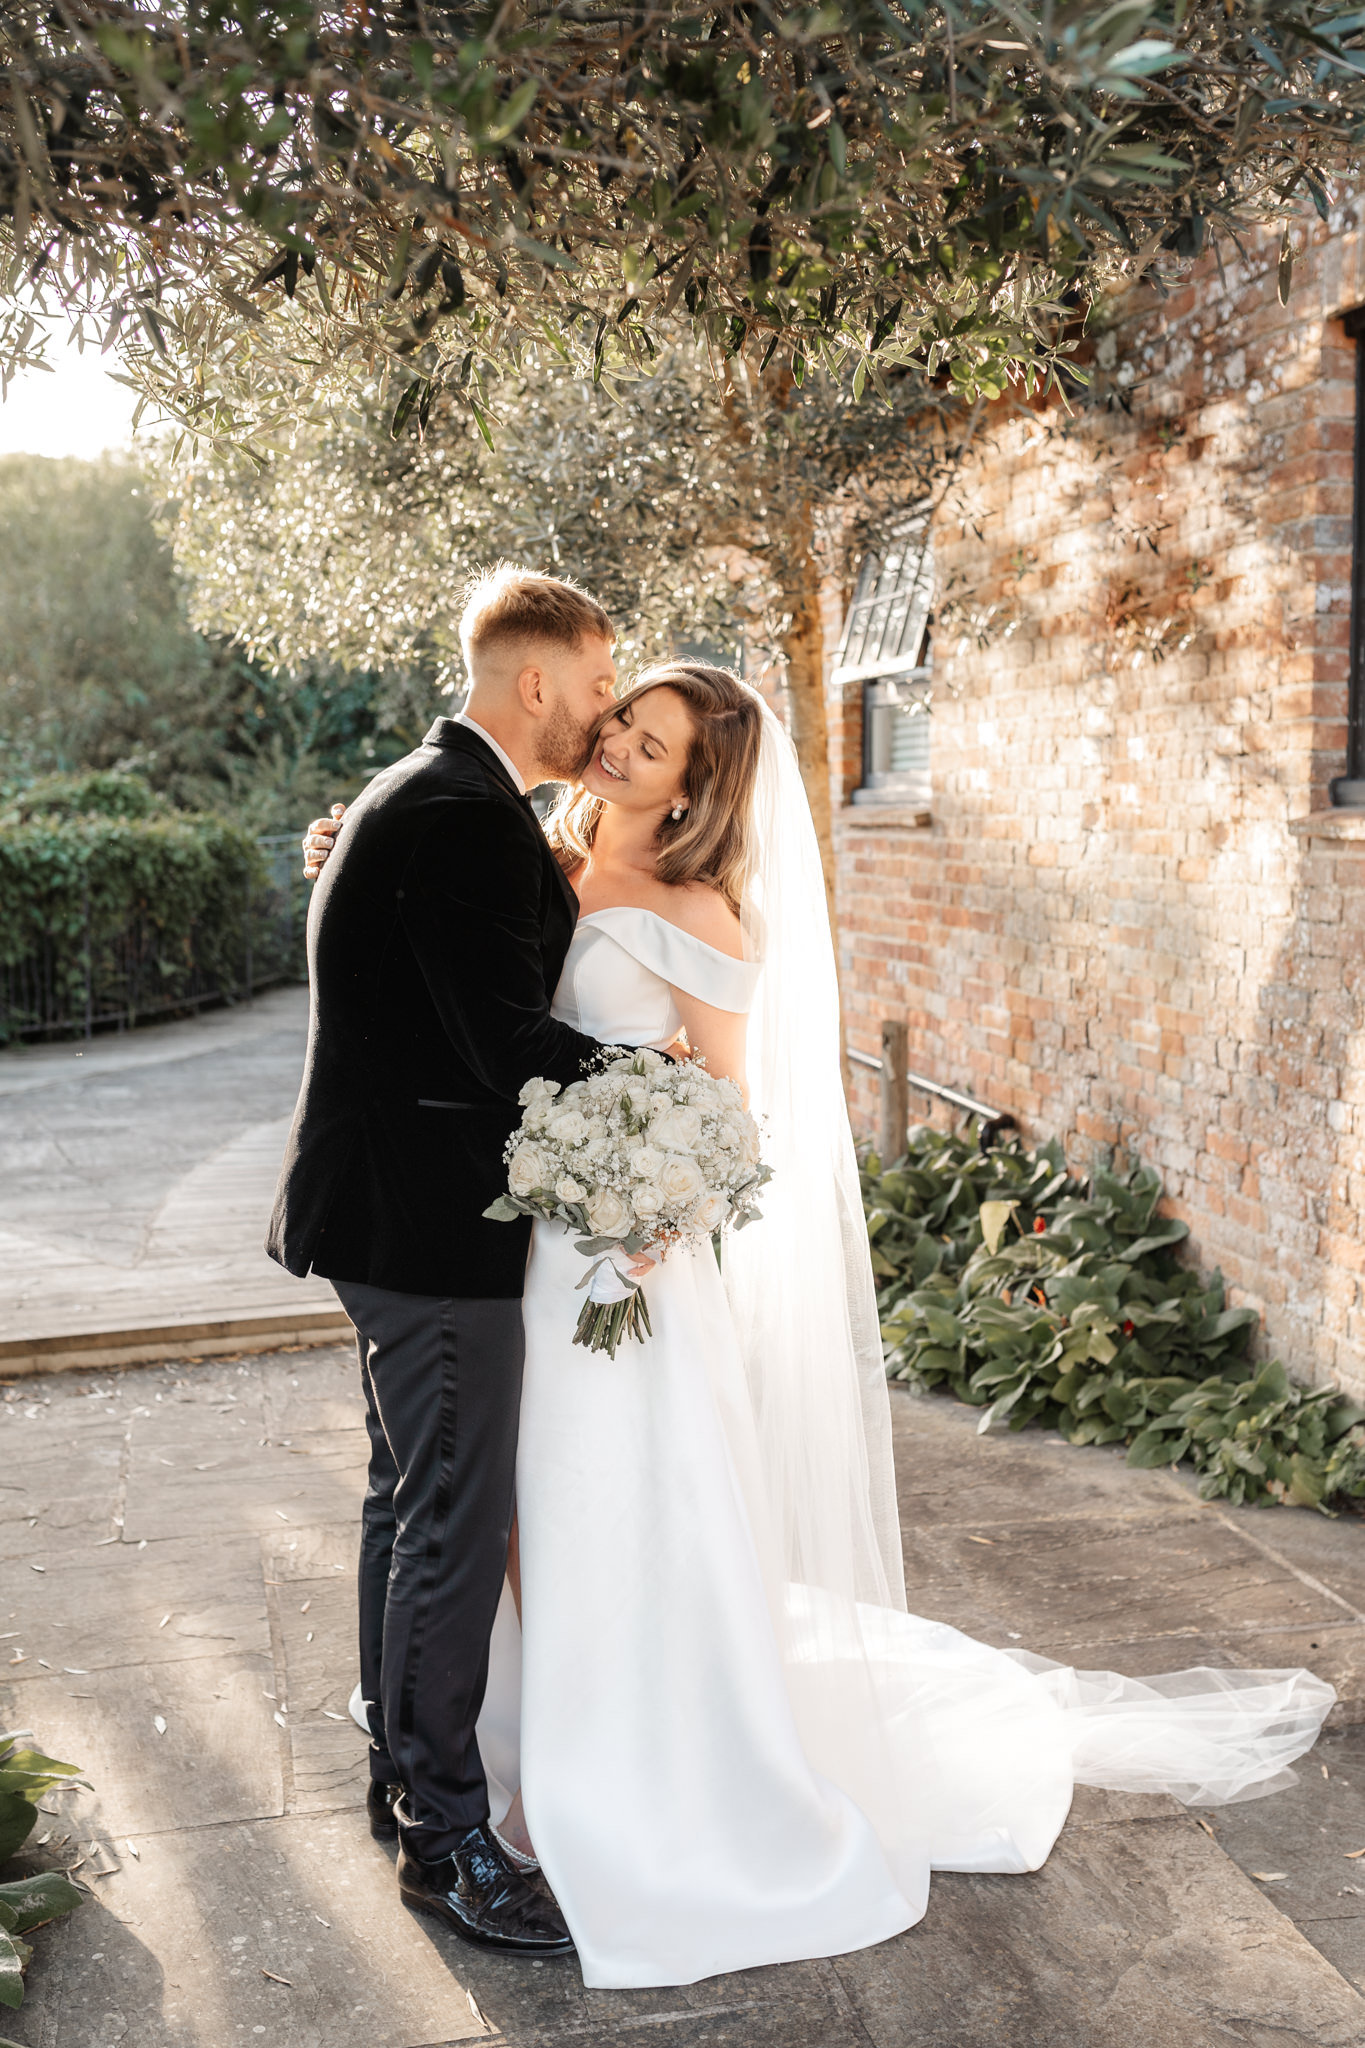 bride and groom portrait at a destination wedding in tuscany italy